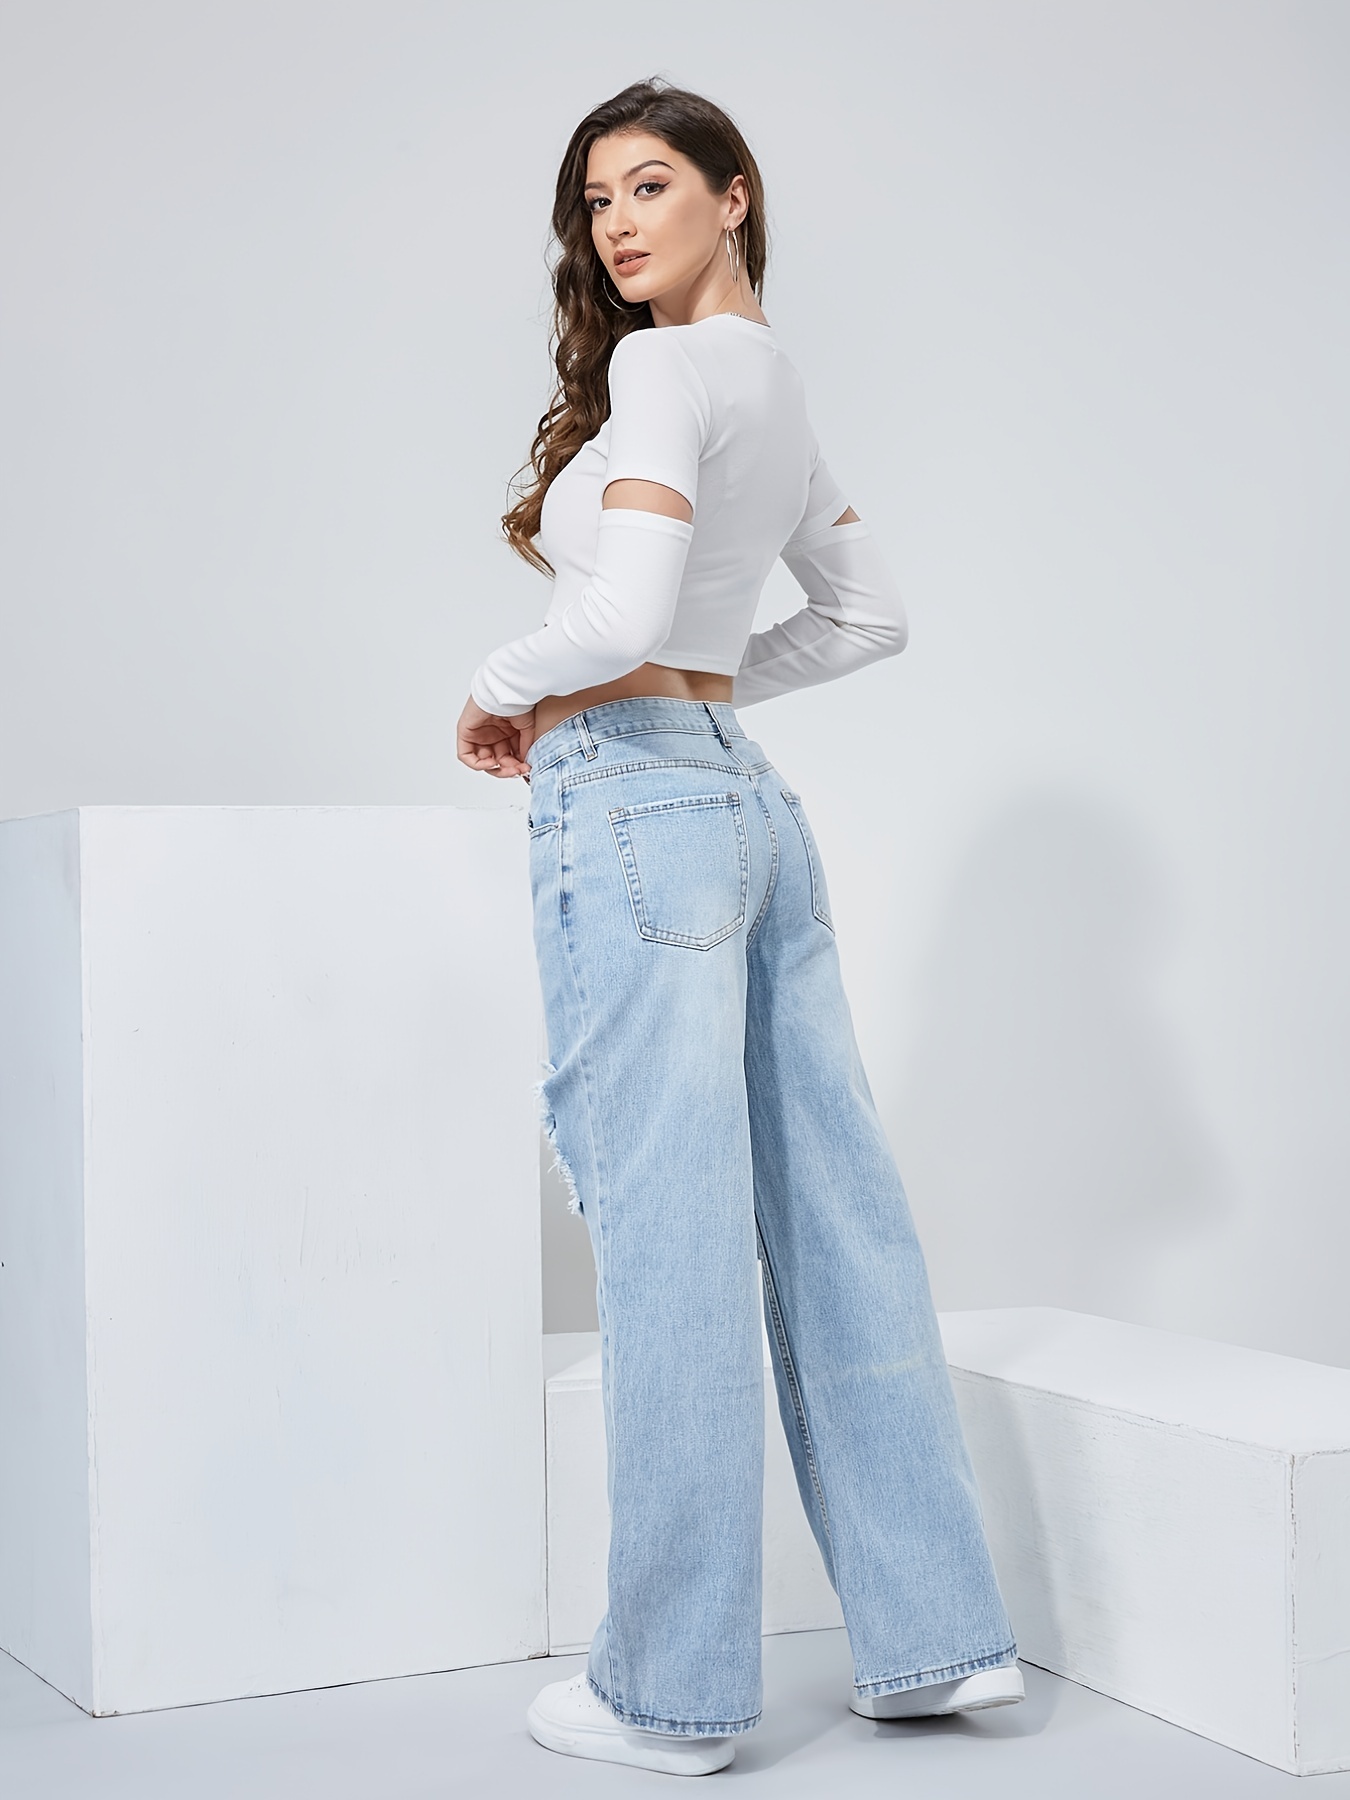 SHEIN Brasil  Jeans outfit women, Outfits con jeans, Women denim jeans